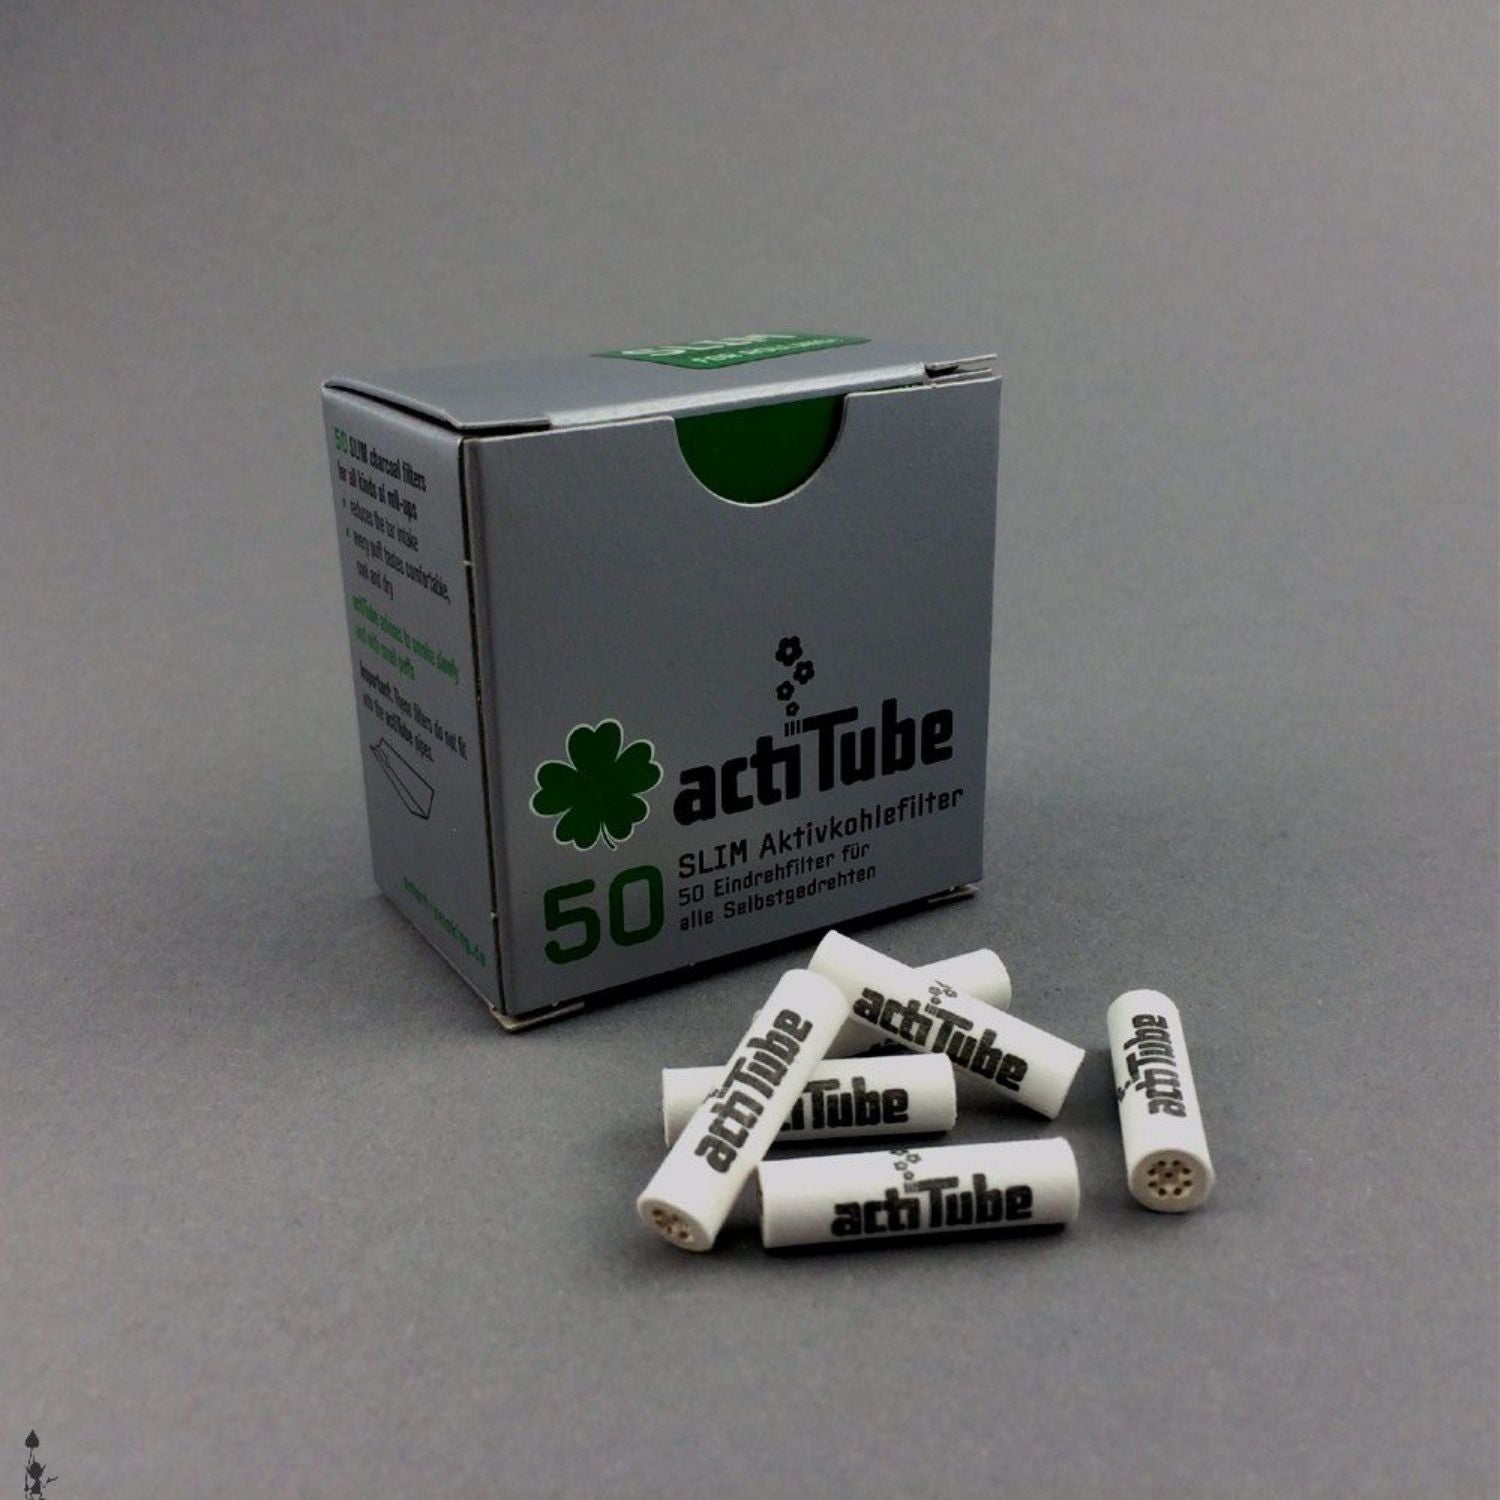 Buy ACTITUBE Activated CHarcoal Filter Pack of 50